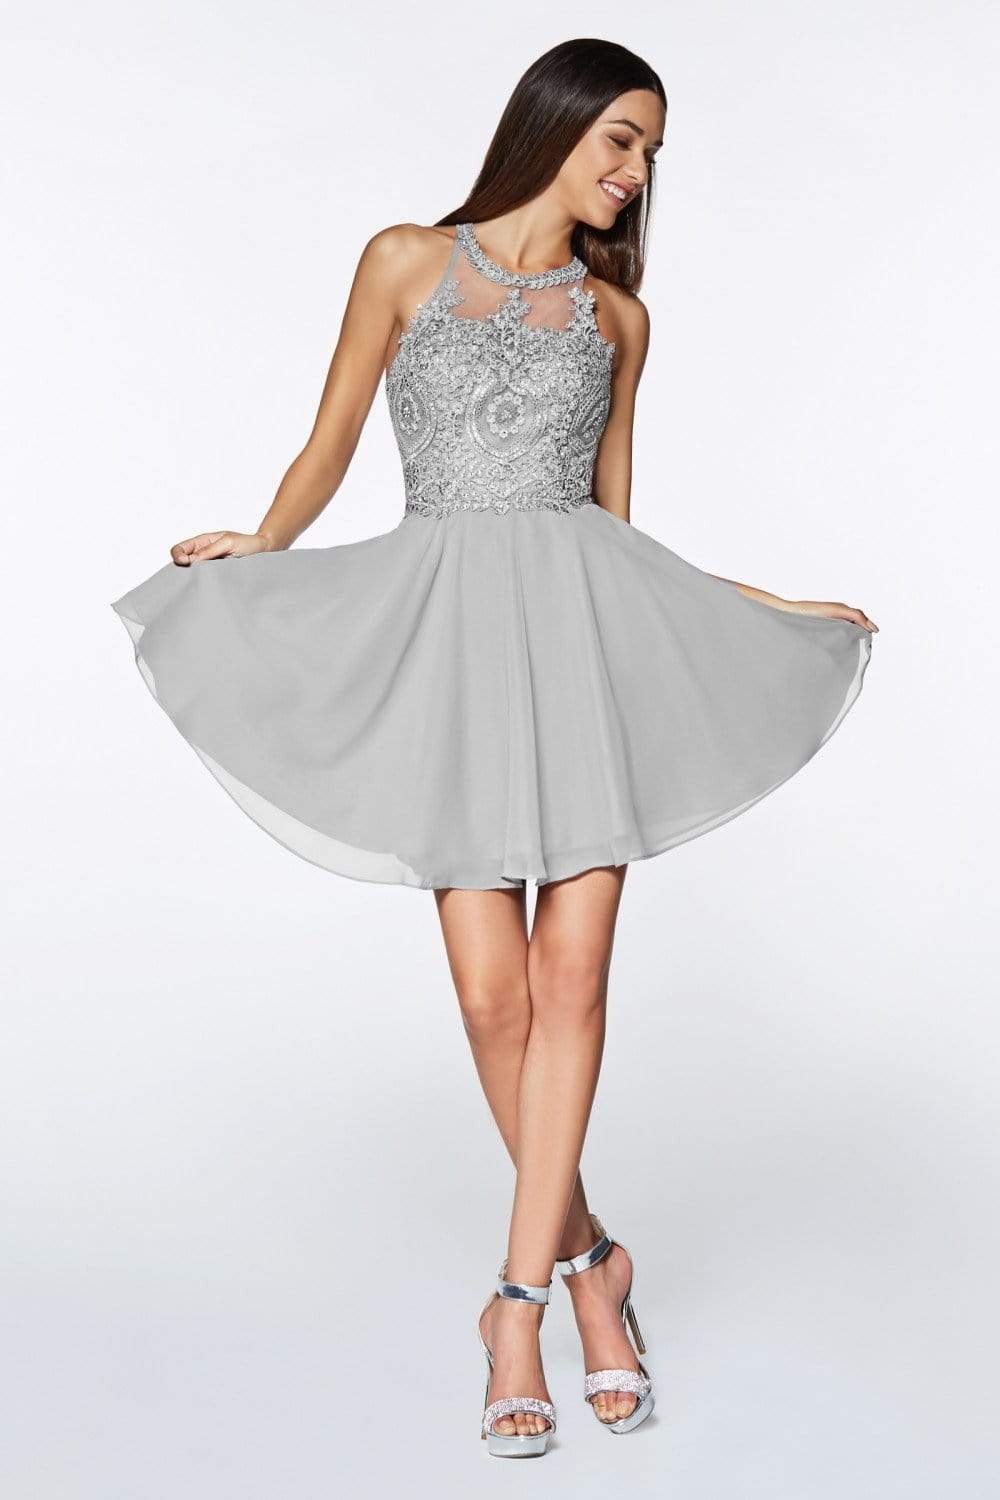 Cinderella Divine - CD0141 Beaded Lace Chiffon Halter Cocktail Dress Special Occasion Dress XXS / Silver